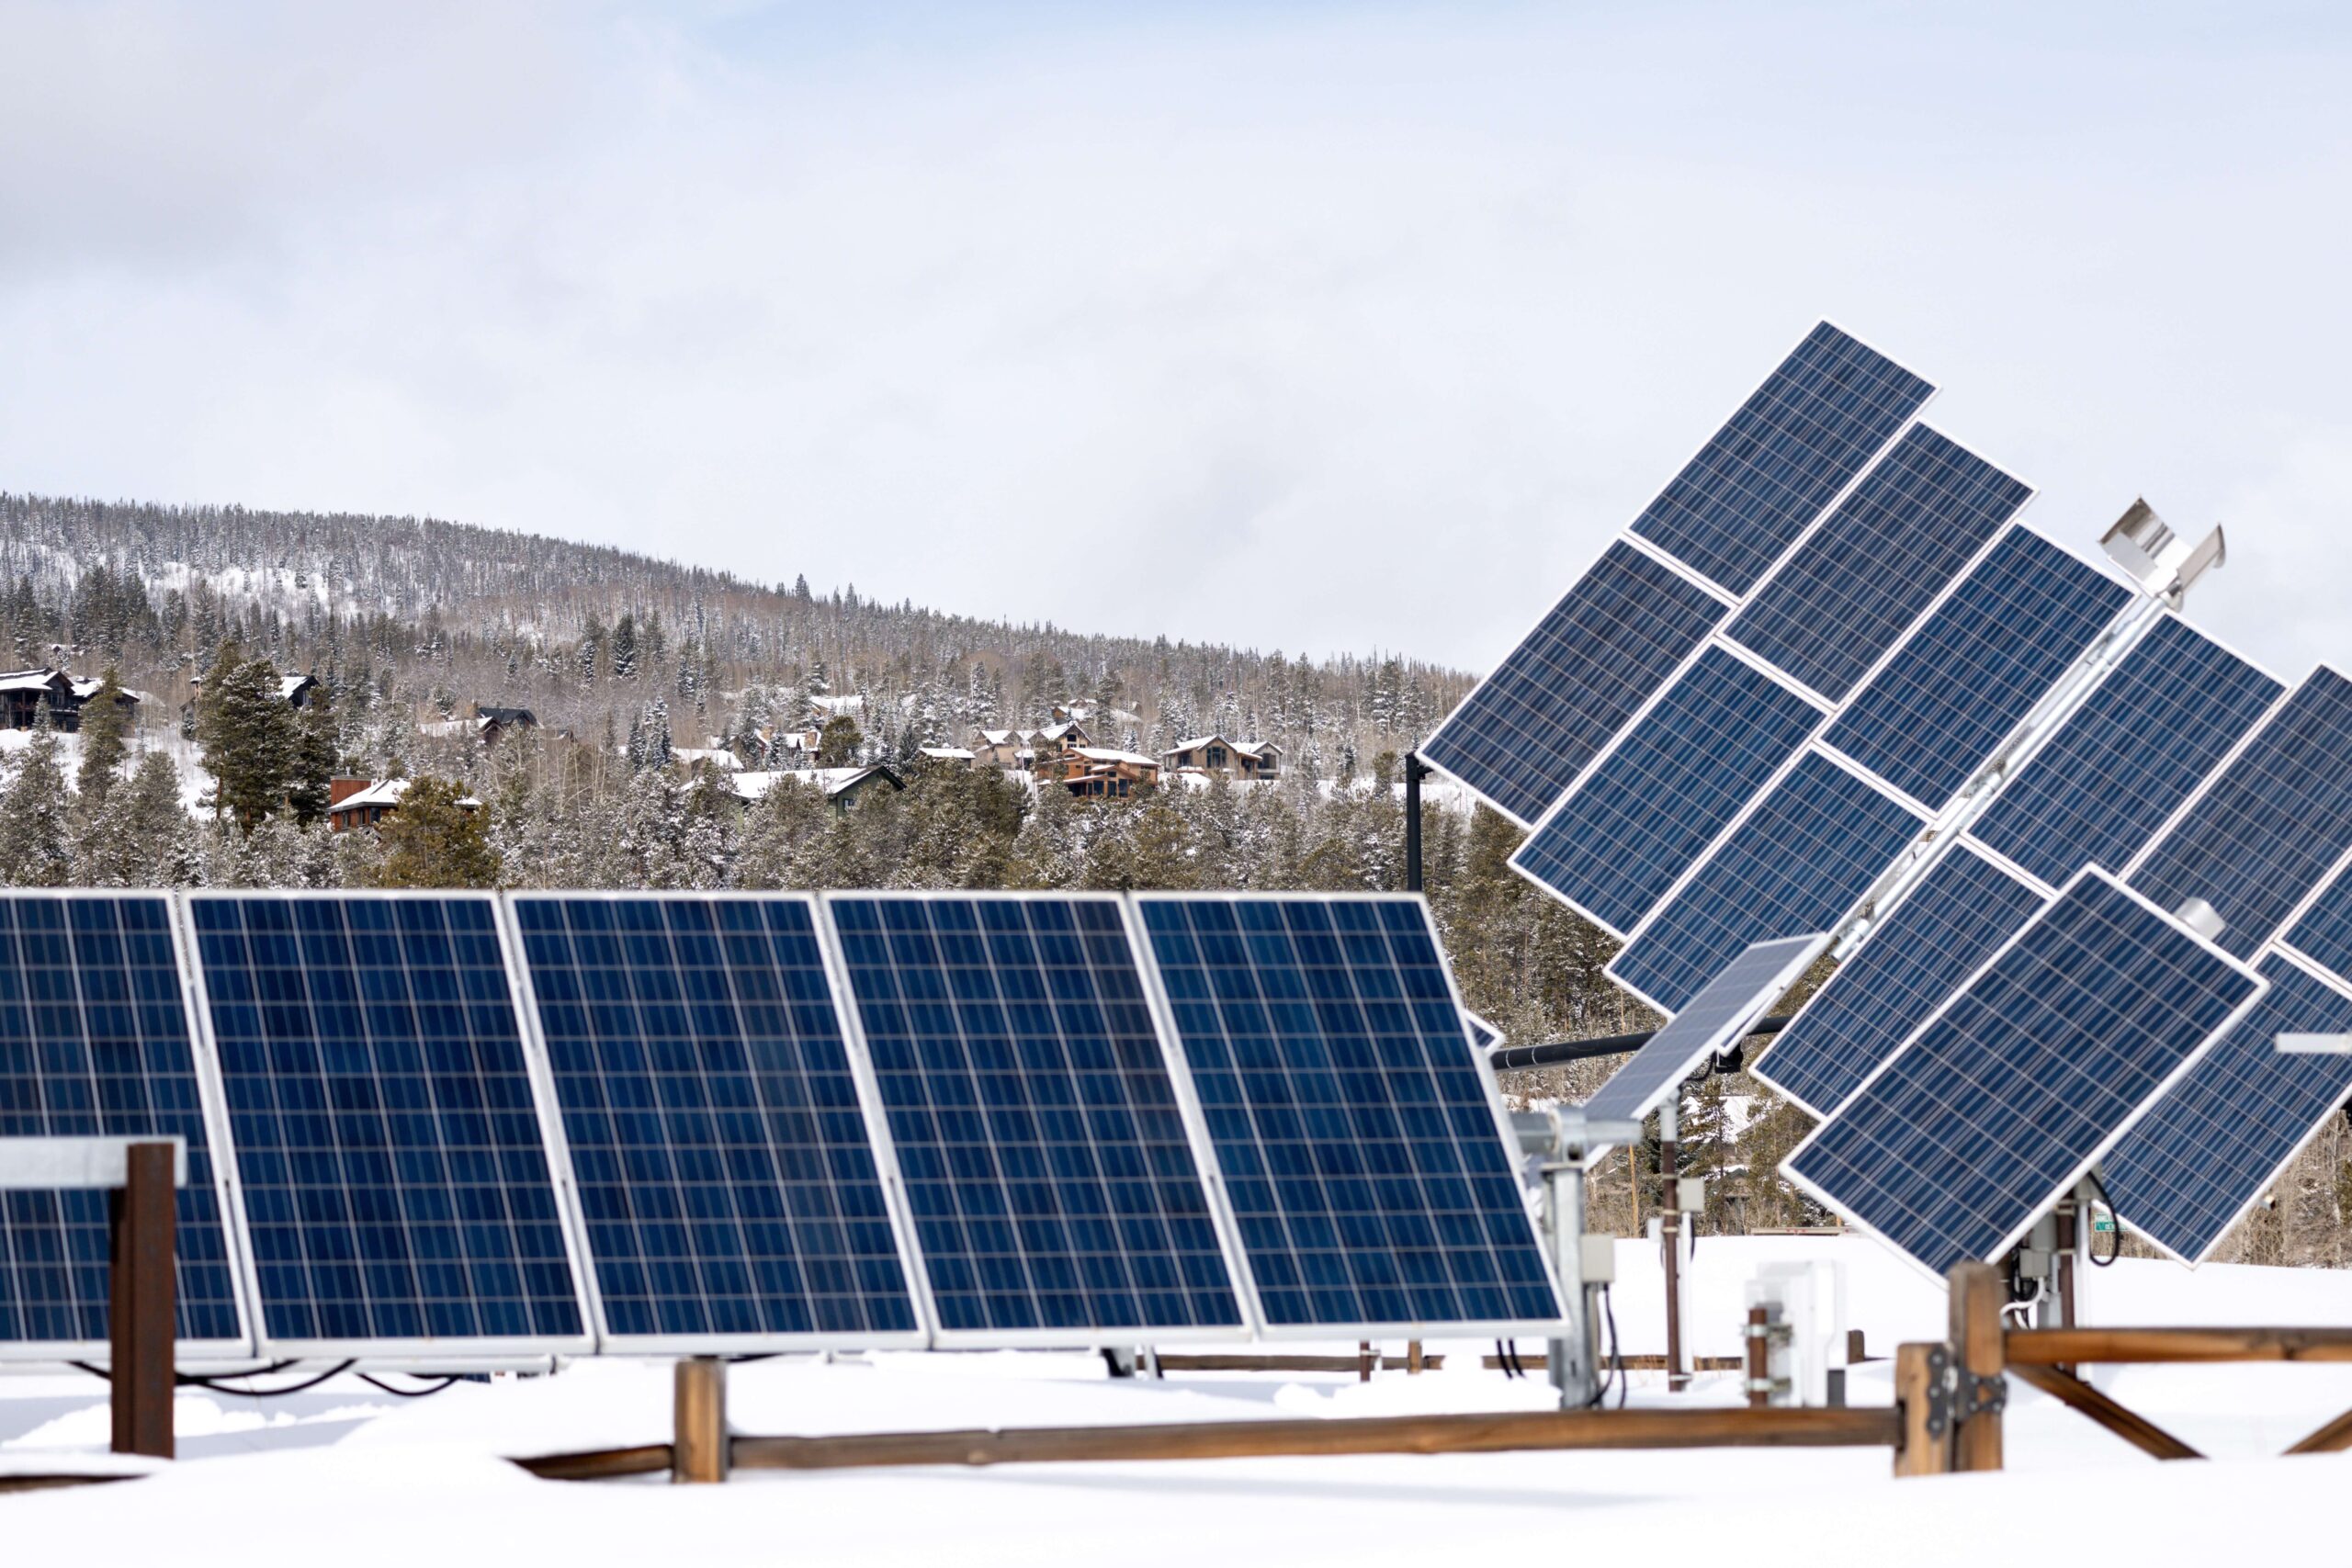 Latest Innovations and Trends in Solar Technology from Solar Companies